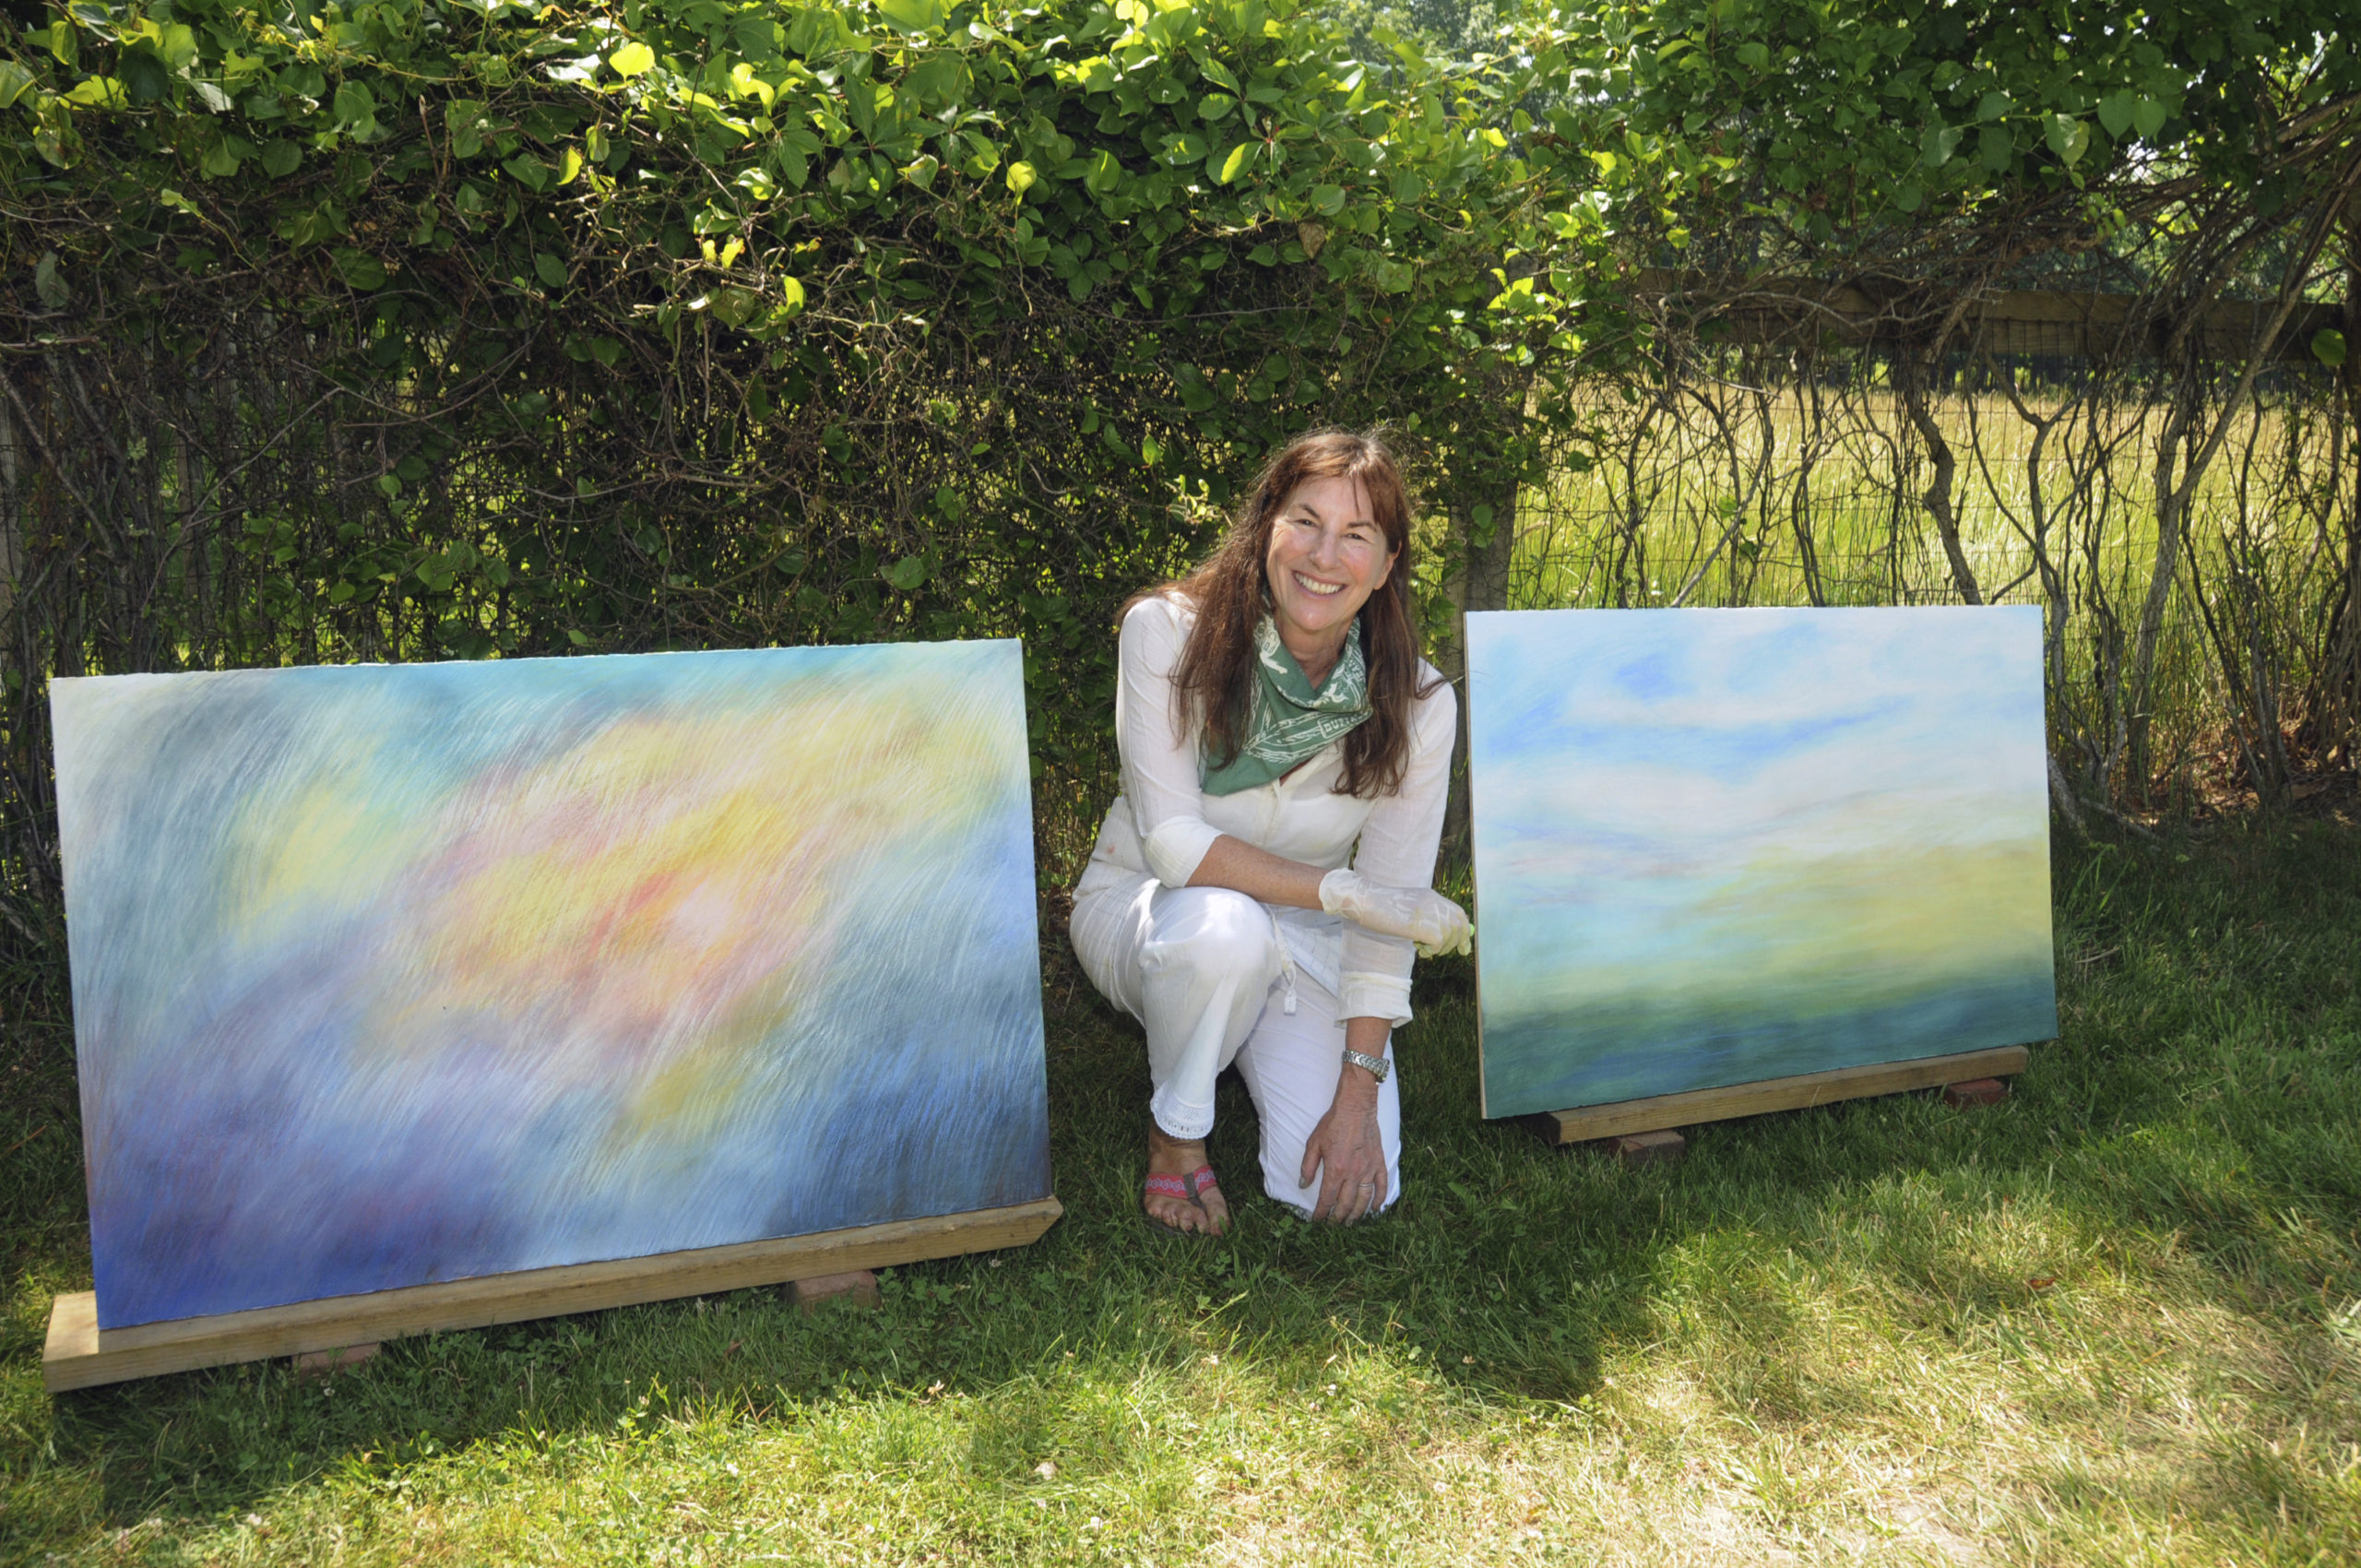 East Hampton Artist Barbara Thomas, along with 70 other EH Artists, set up her drive-by pop-up gallery in front of her home on Saturday for 